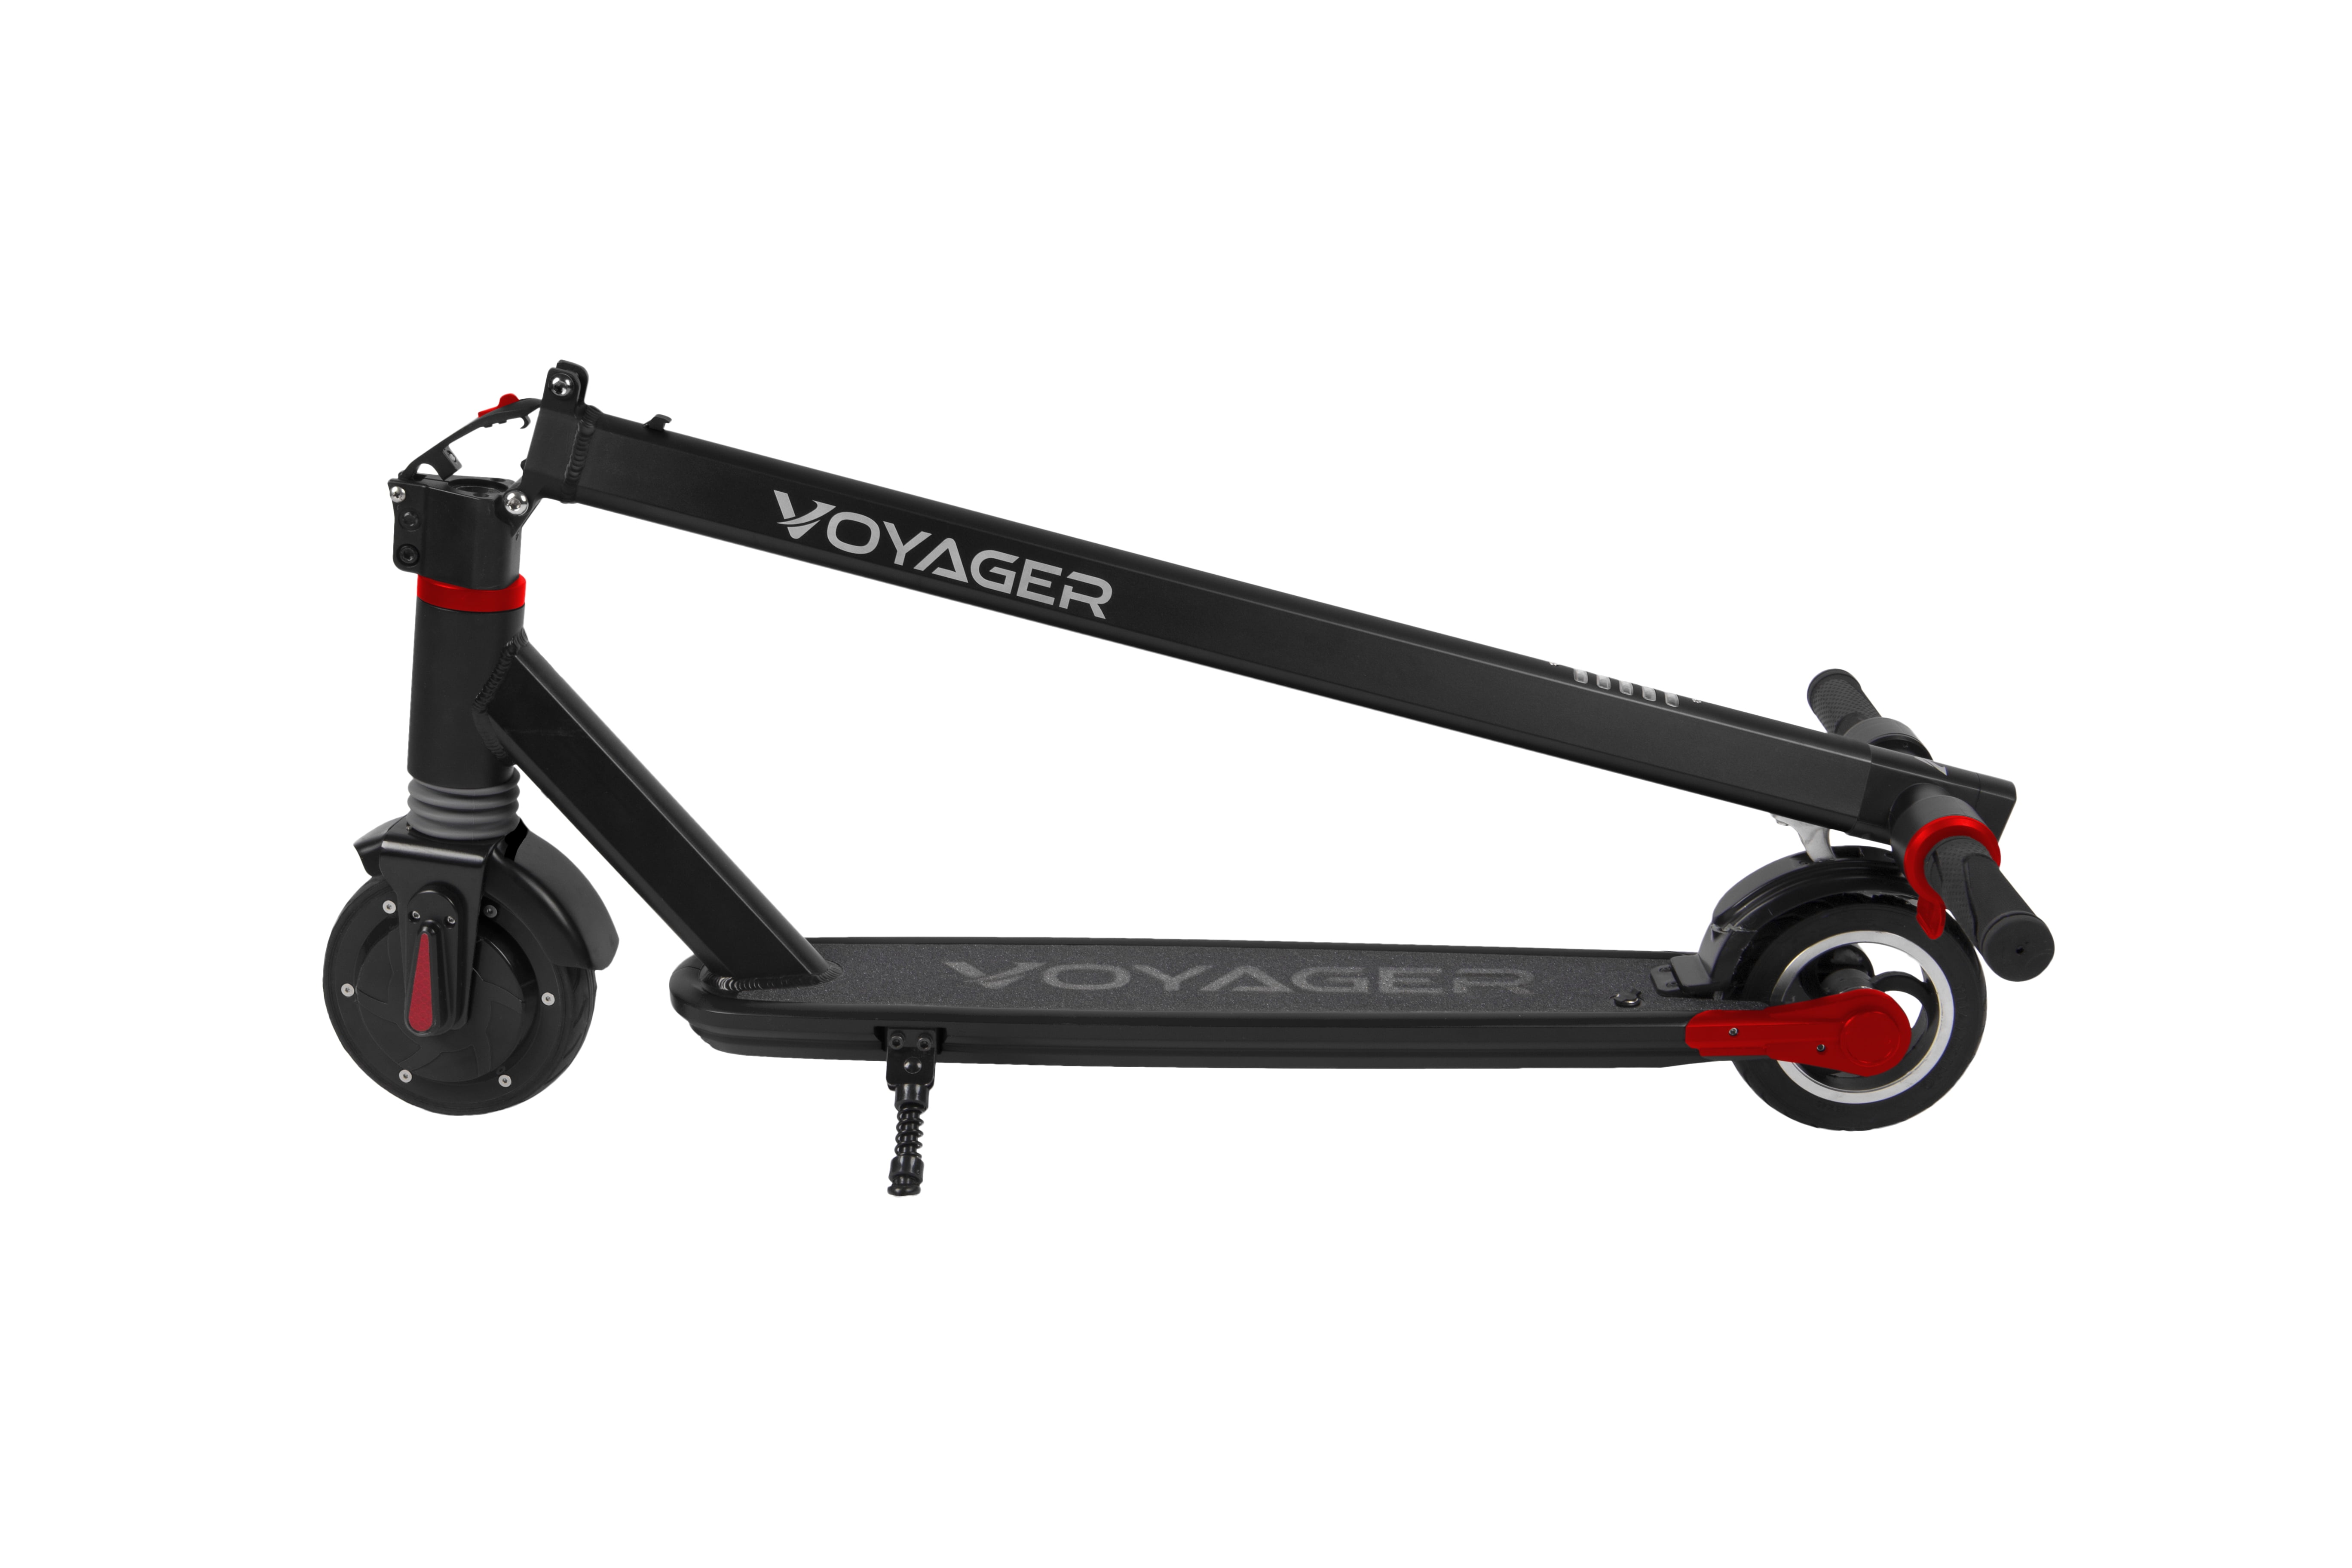 voyager electric scooter